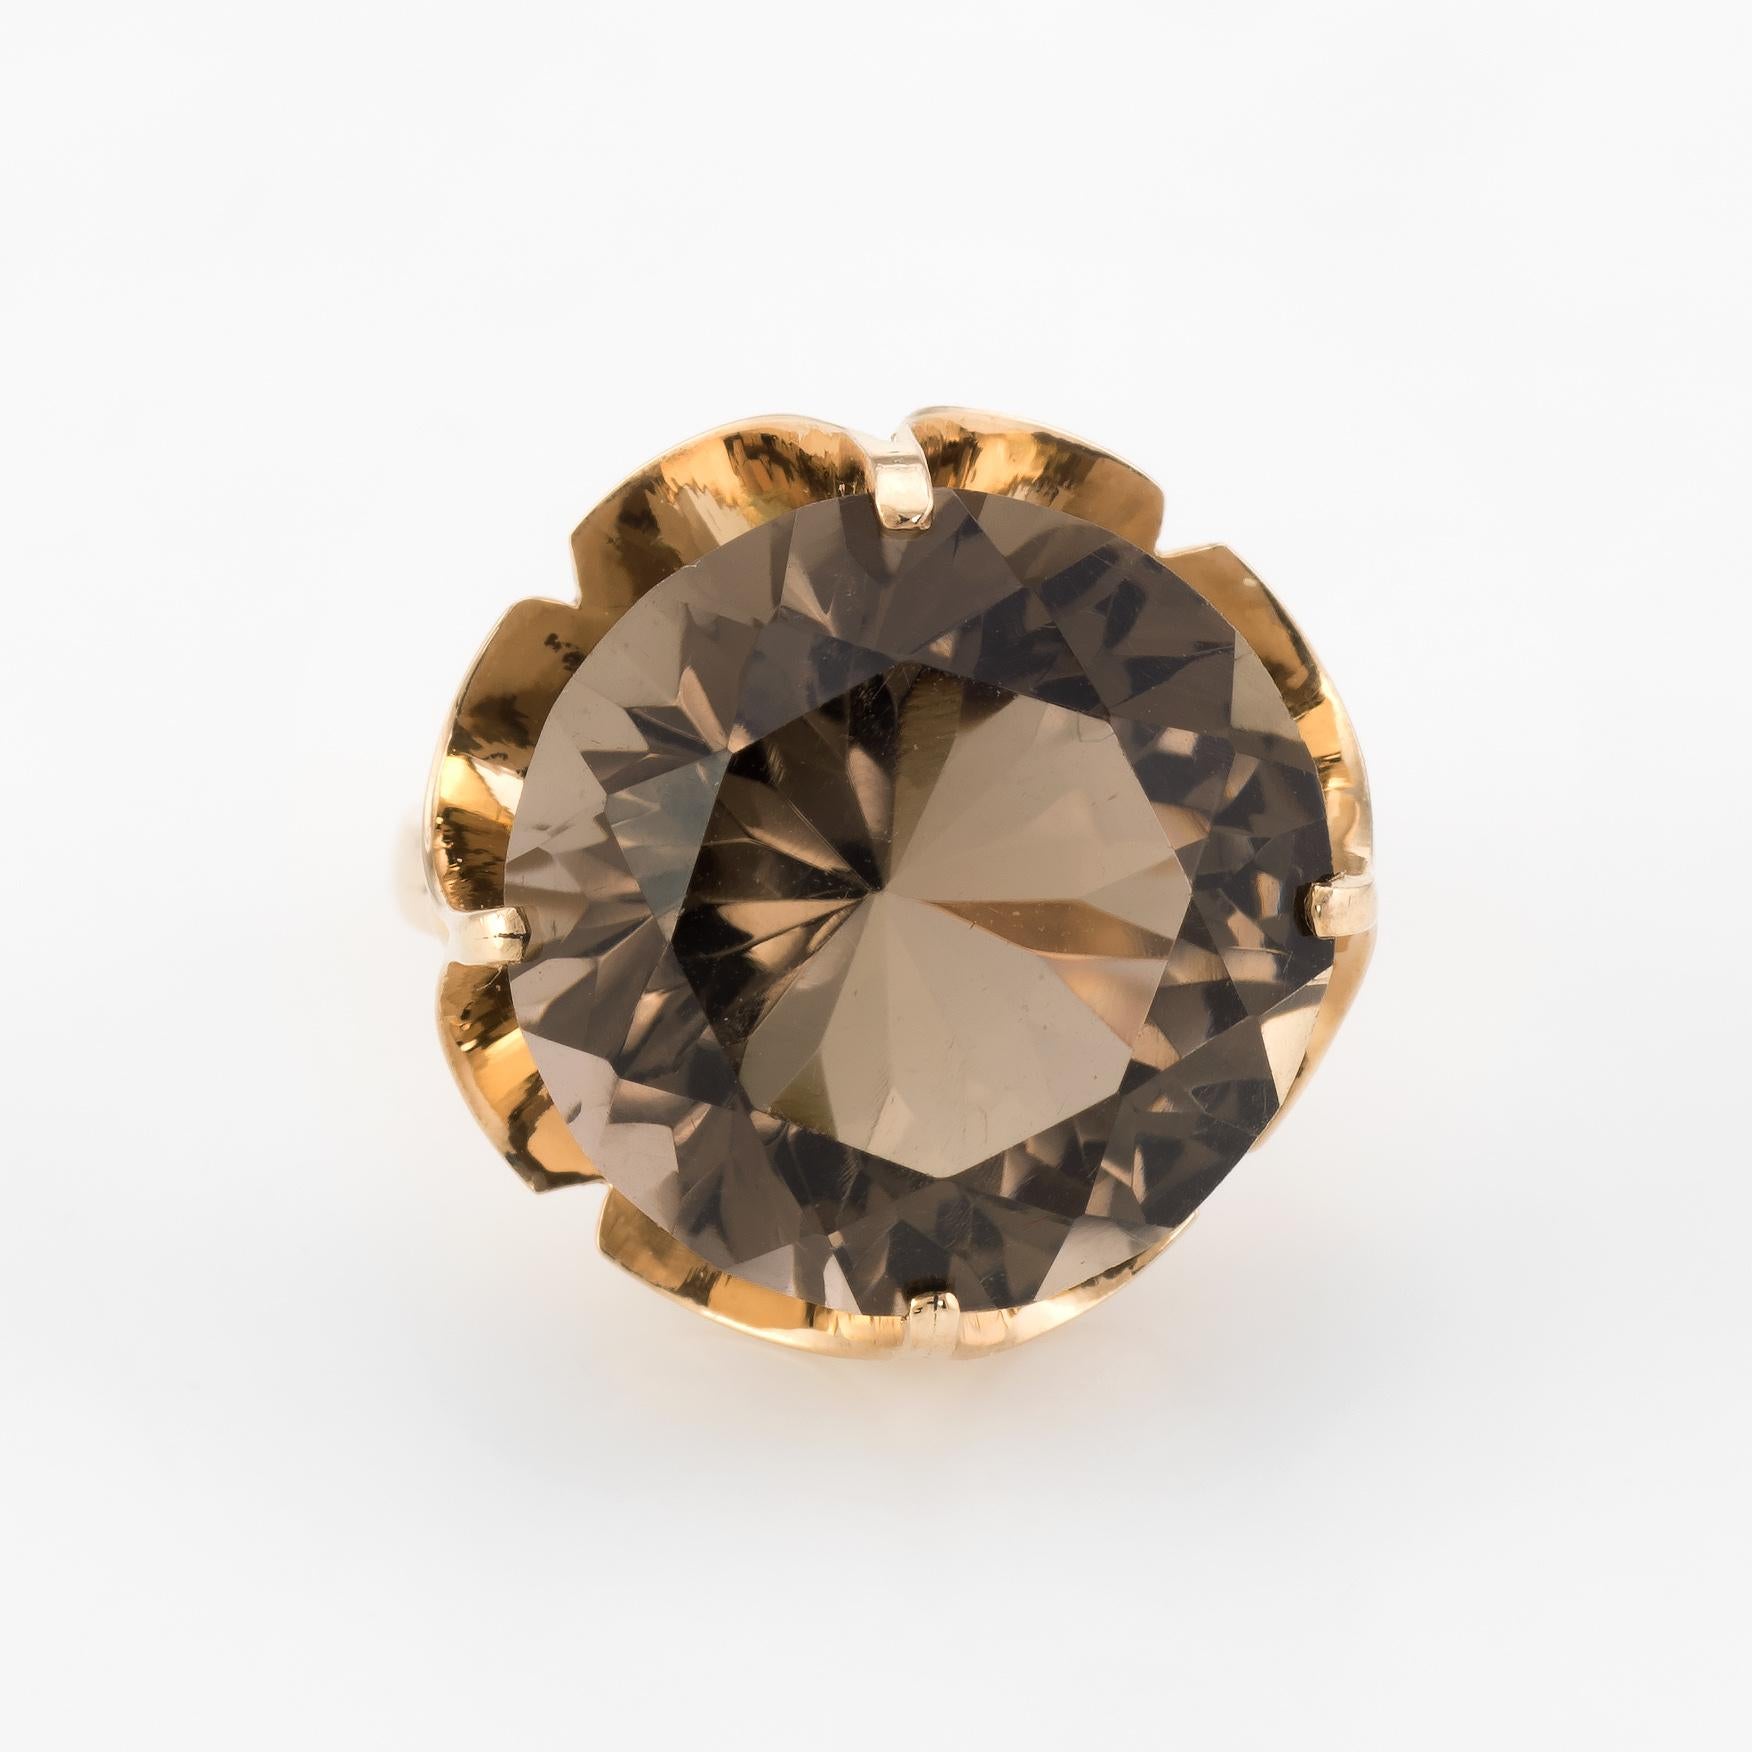 Finely detailed vintage statement cocktail ring (circa 1950s to 1960s), crafted in 14 karat yellow gold. 

Dramatic and bold details abound with a centrally mounted round faceted smoky quartz (topaz) measuring 16mm (estimated at 15.25 carats). The